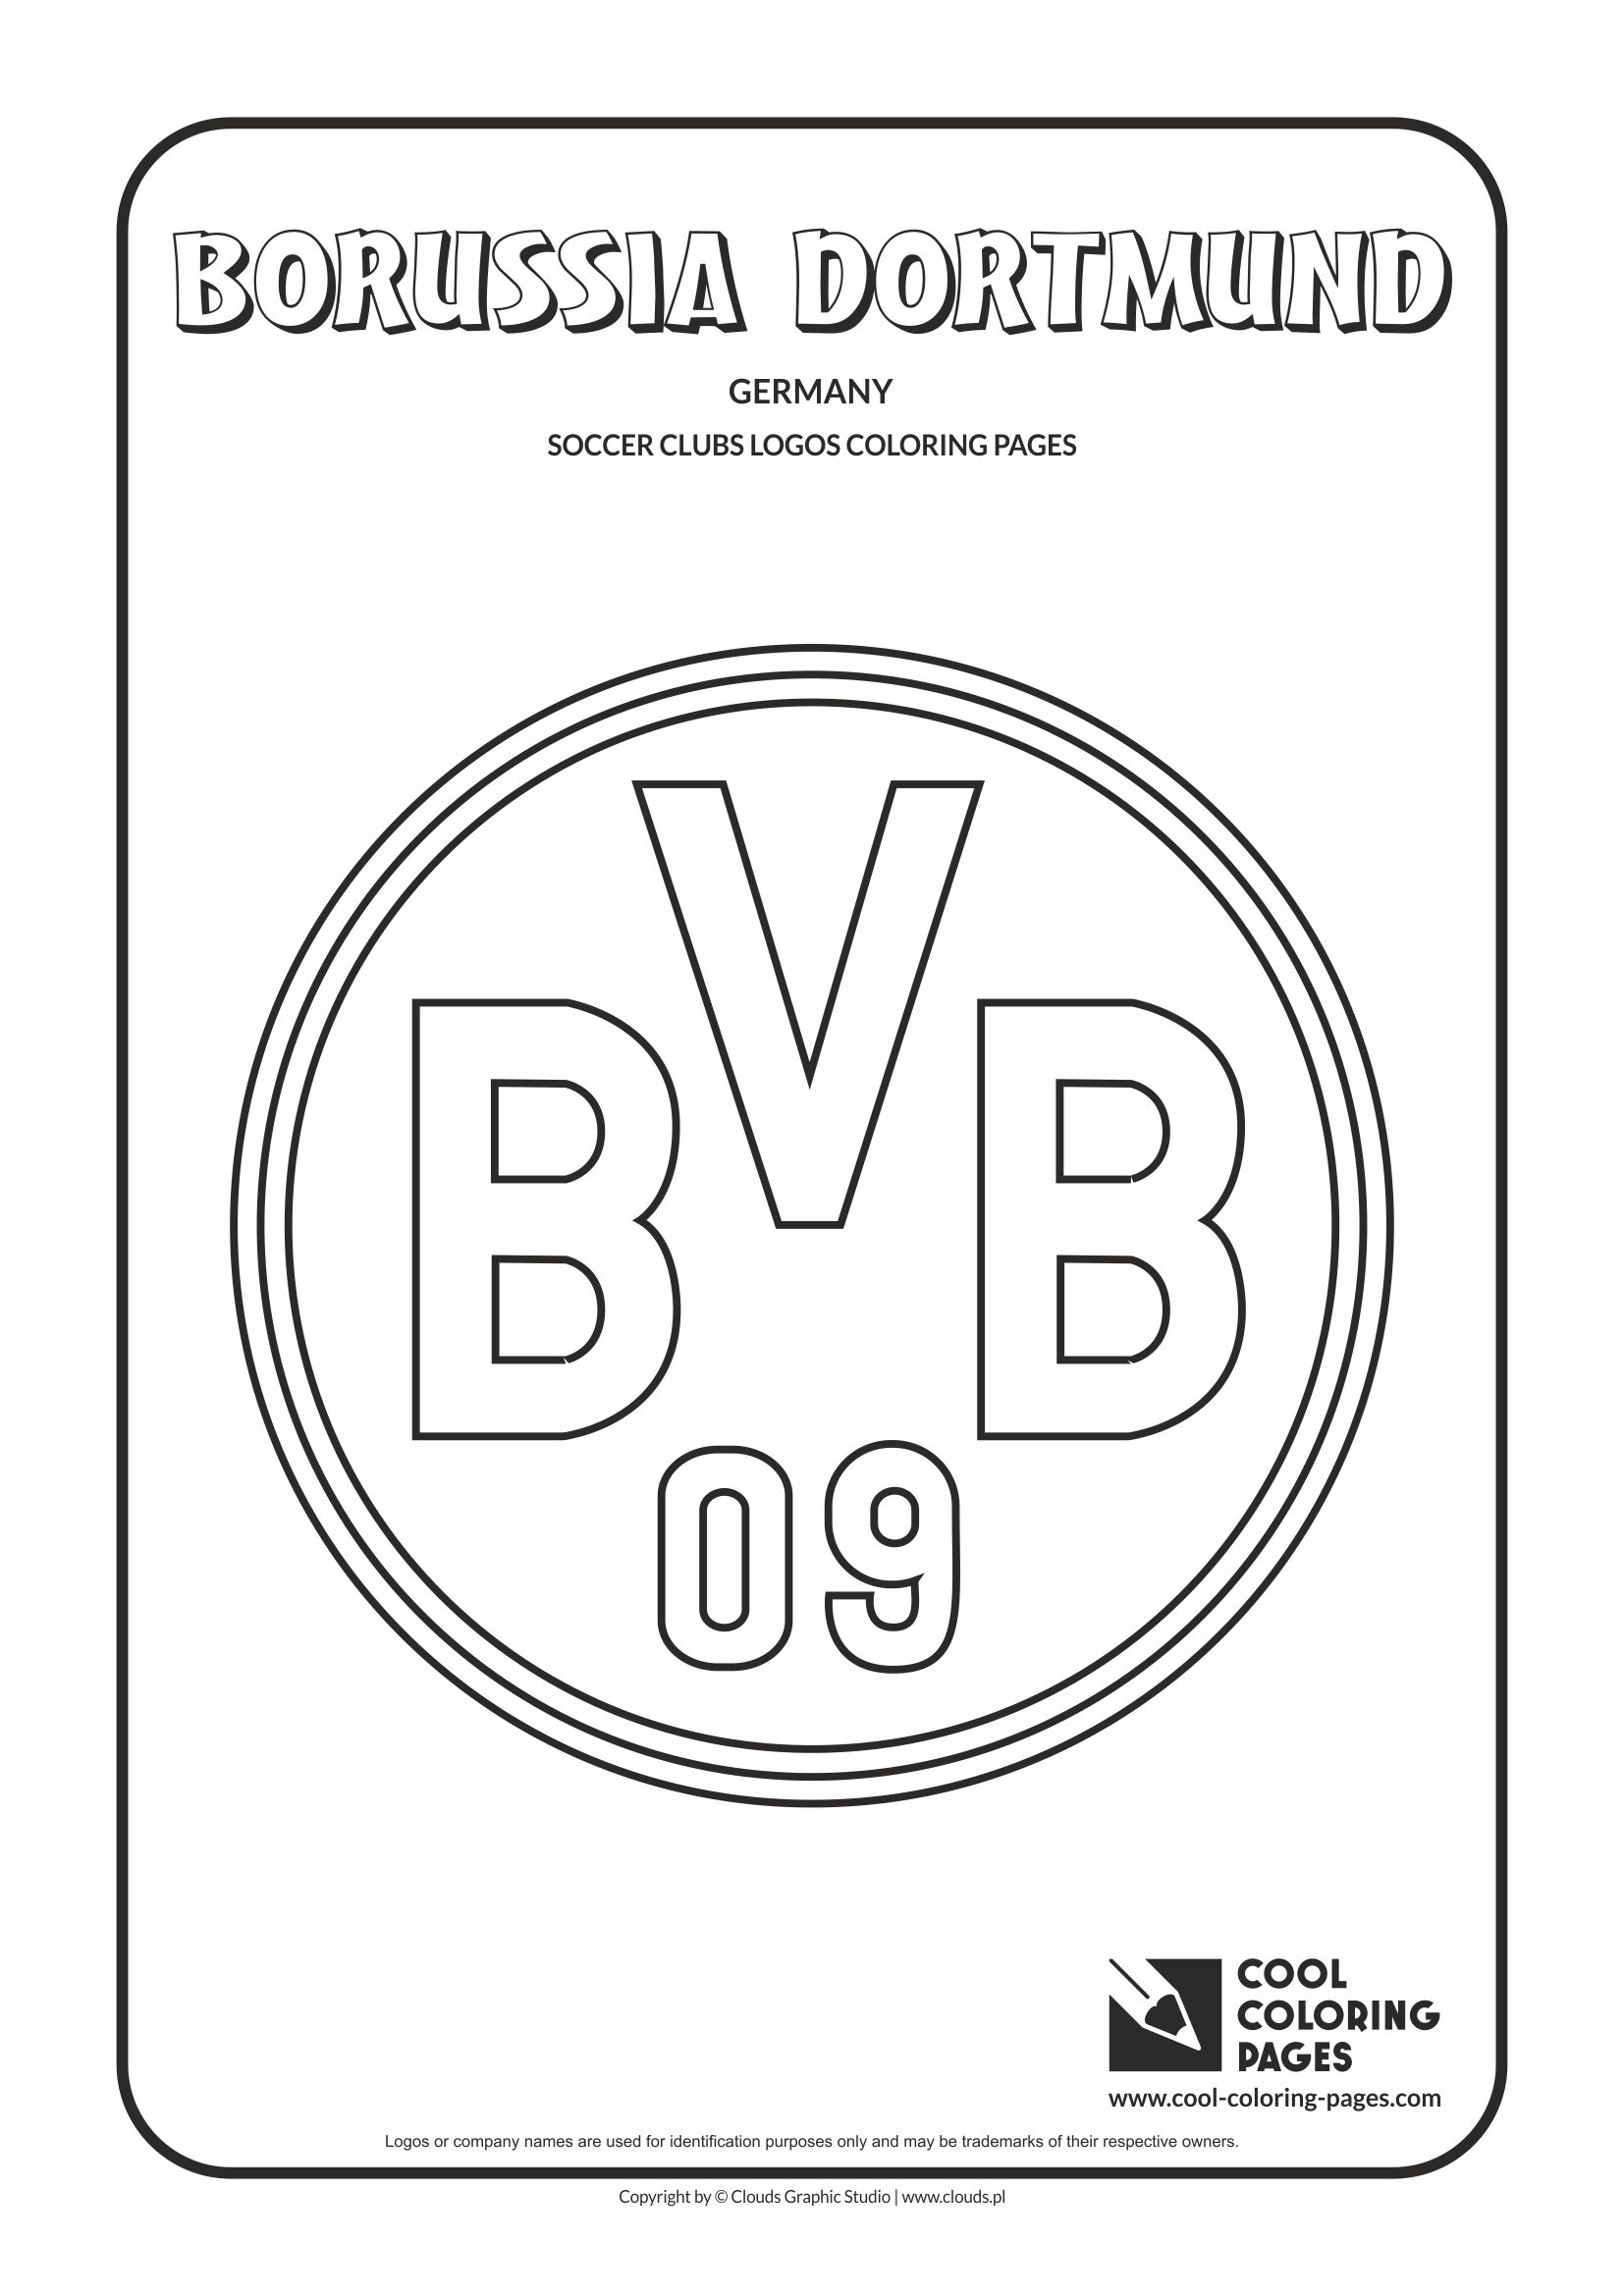 cool coloring pages borussia dortmund logo coloring page